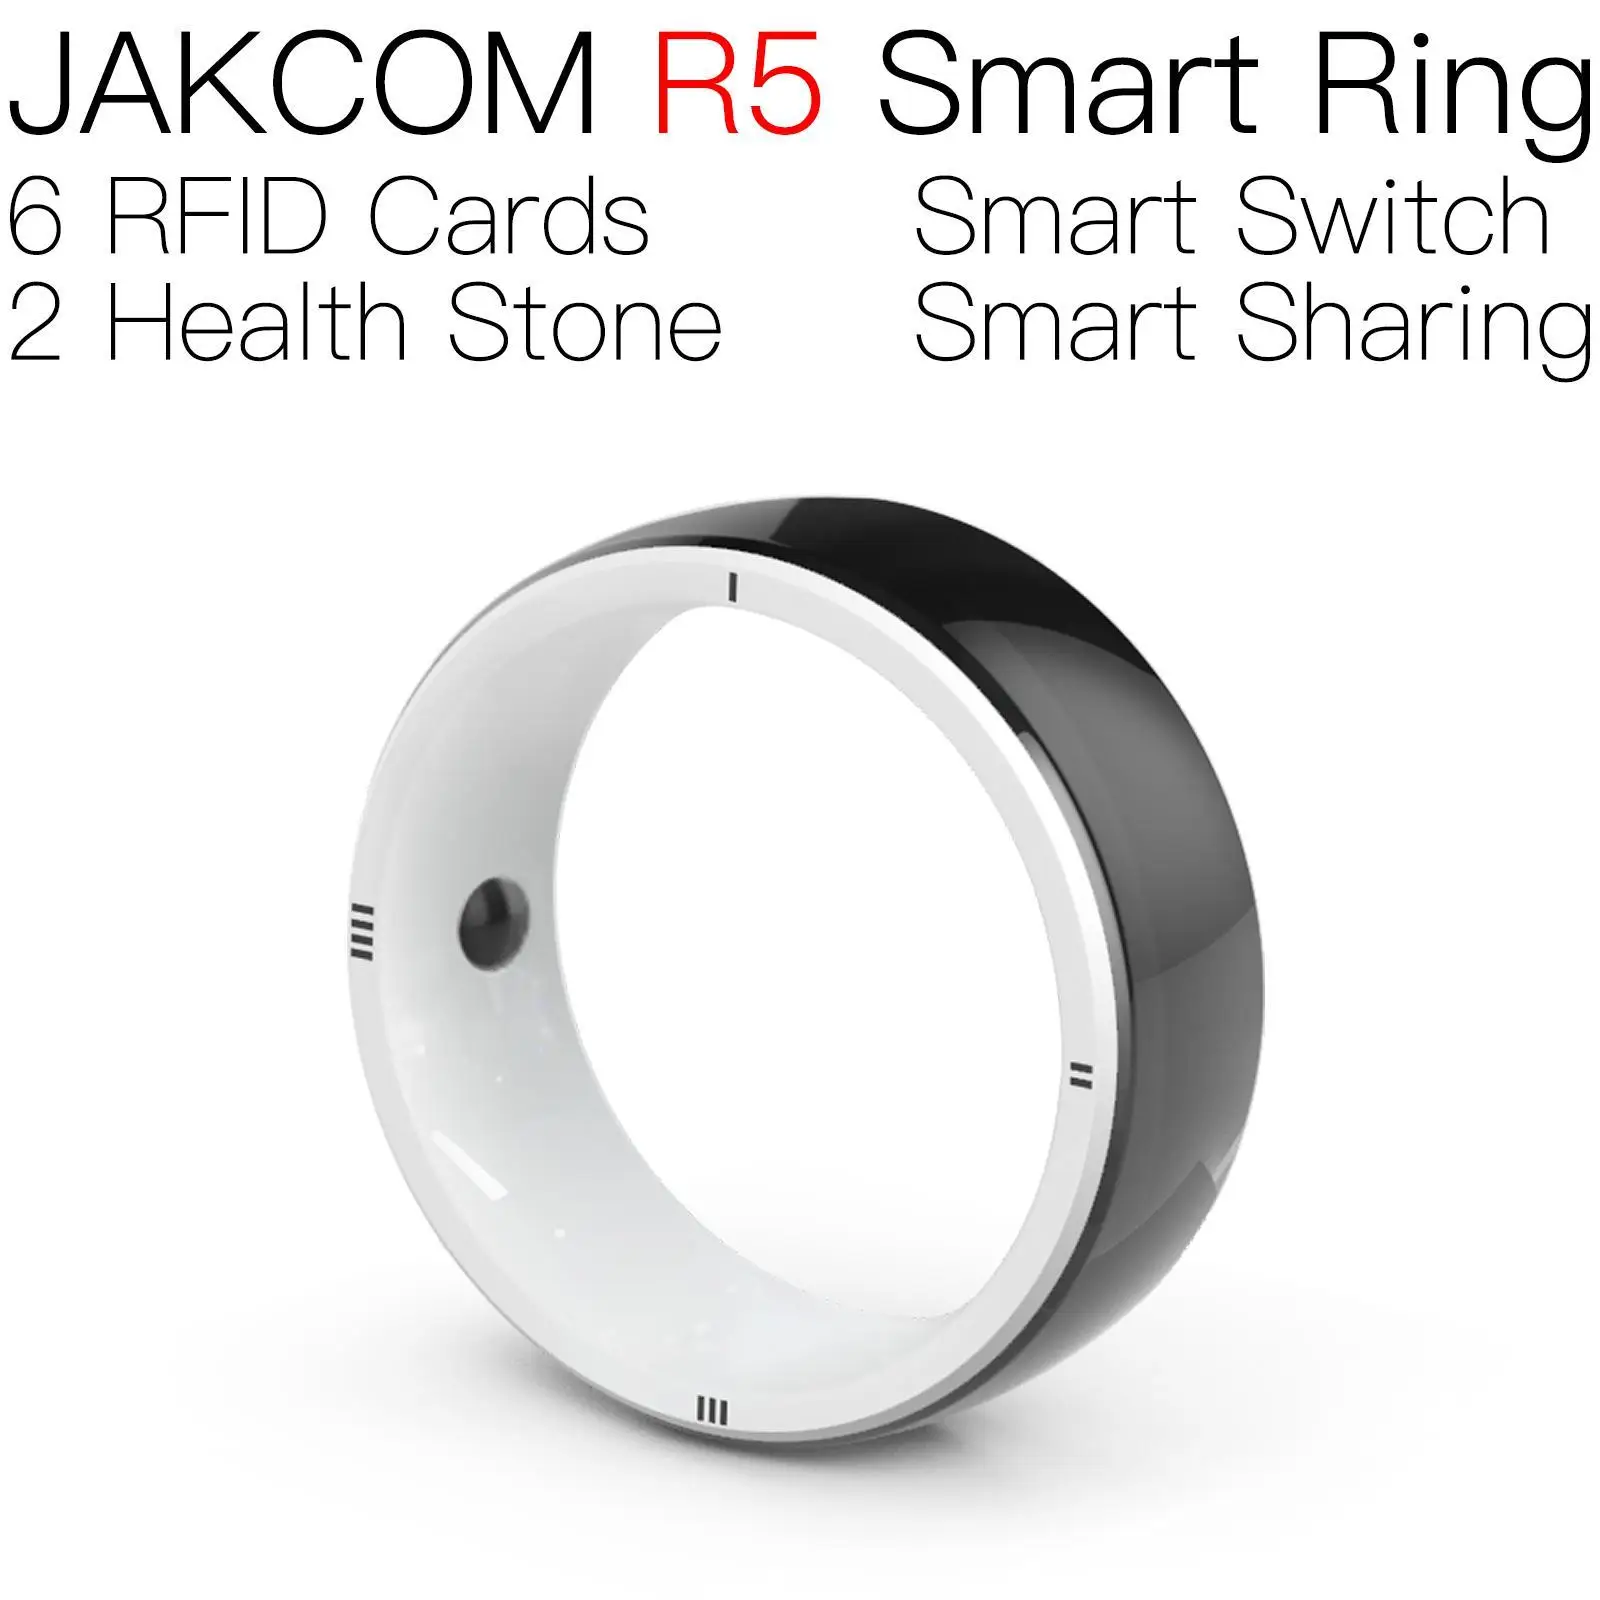 

JAKCOM R5 Smart Ring Best gift with doors for big dog mikrochip chip cat tags pets lots rfid 125khz bell name tag running text